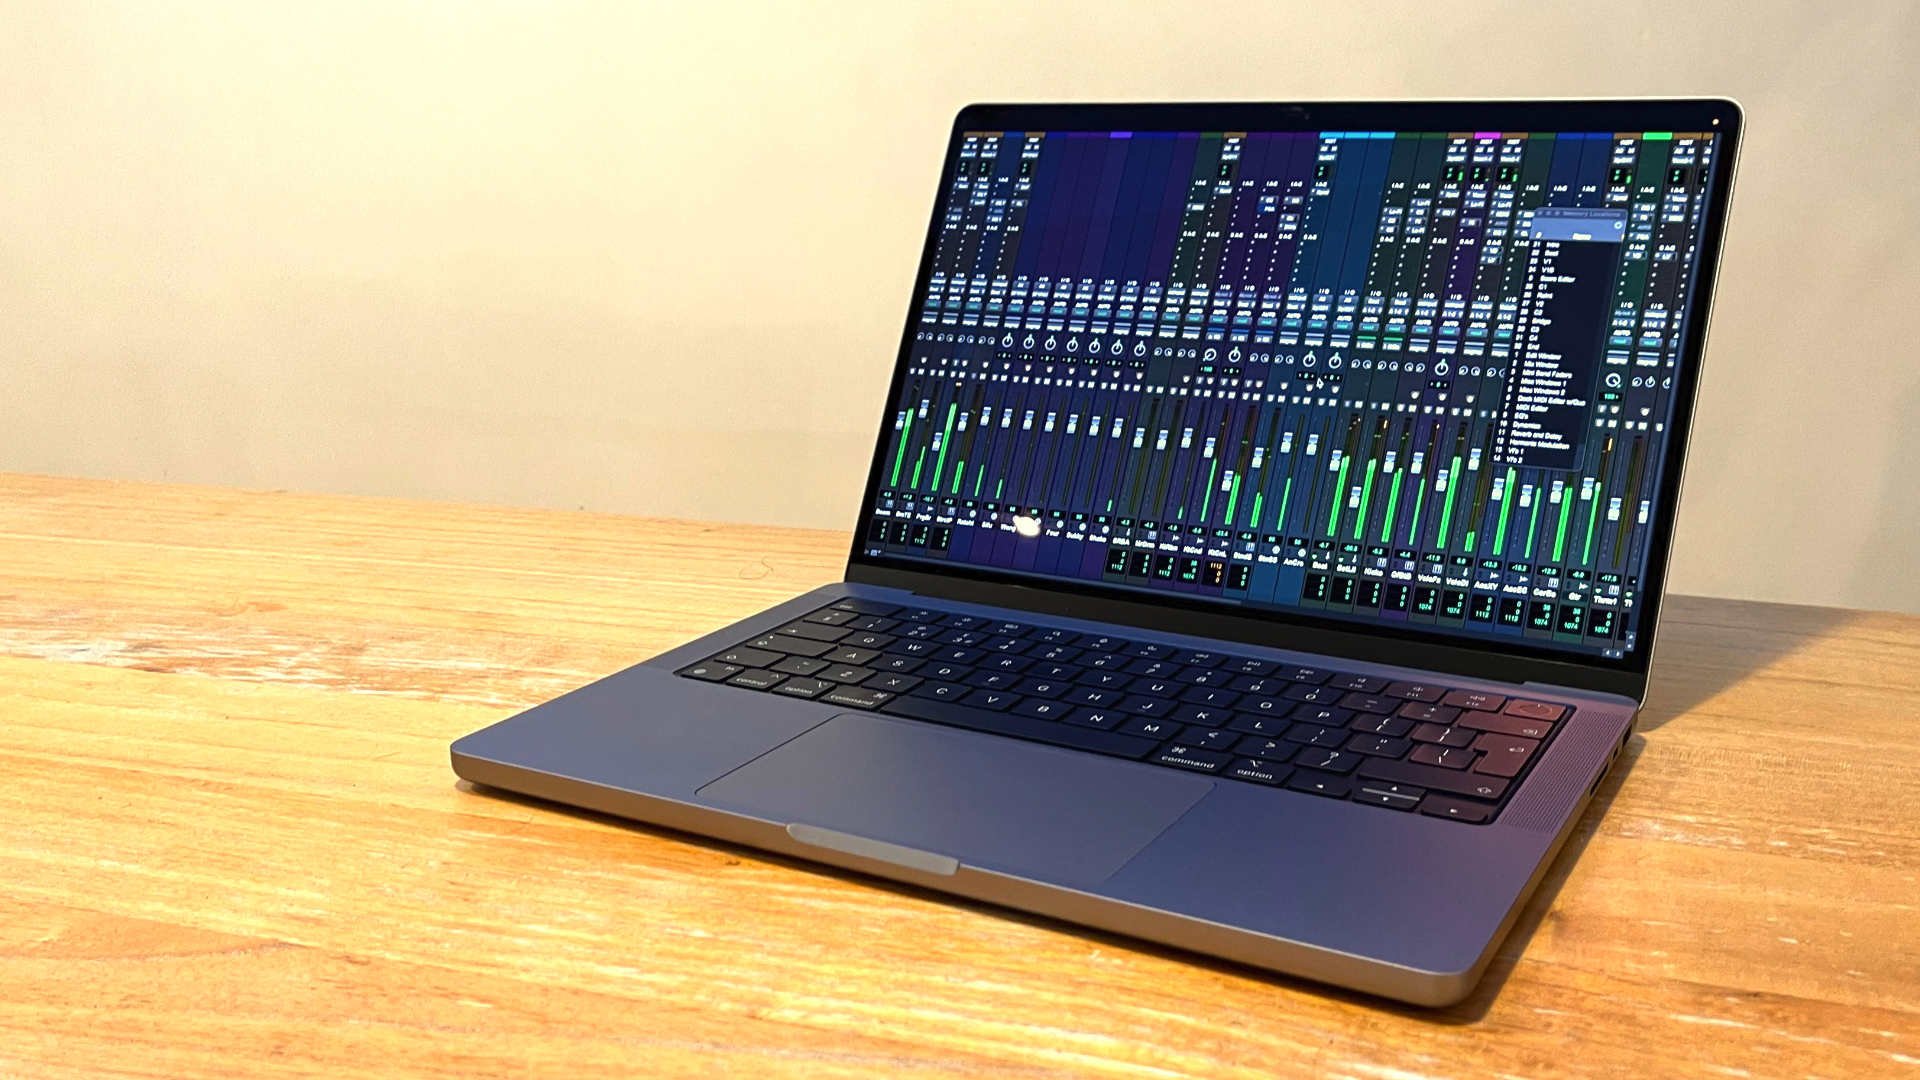 MacBook Pro 2021 With M1 Max - Experts Give Their First Impressions